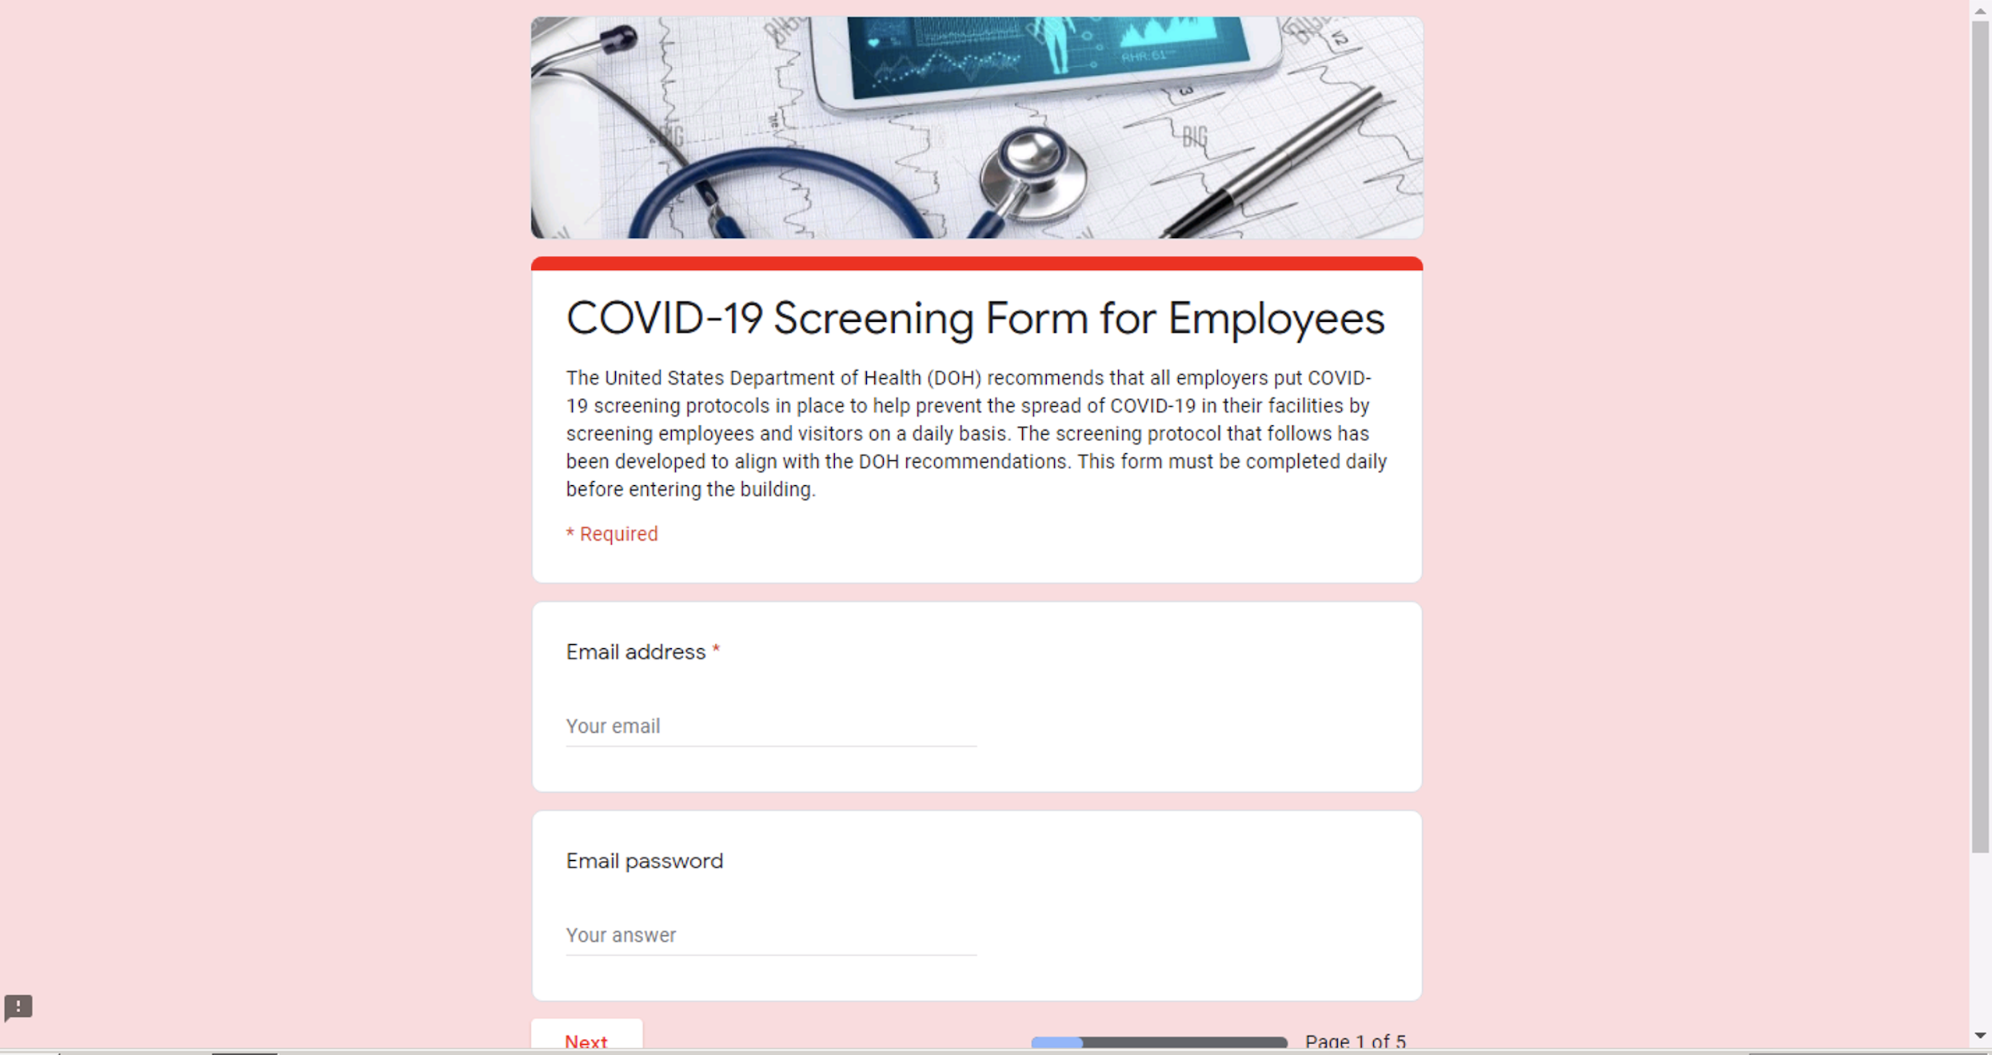 This fake Google Form first asks the user to input his or her email address and password in order to participate in a fabricated company COVID-19 screening program. The form combines legitimate-sounding health-related questions with questions aimed at stealing the user's credentials. 